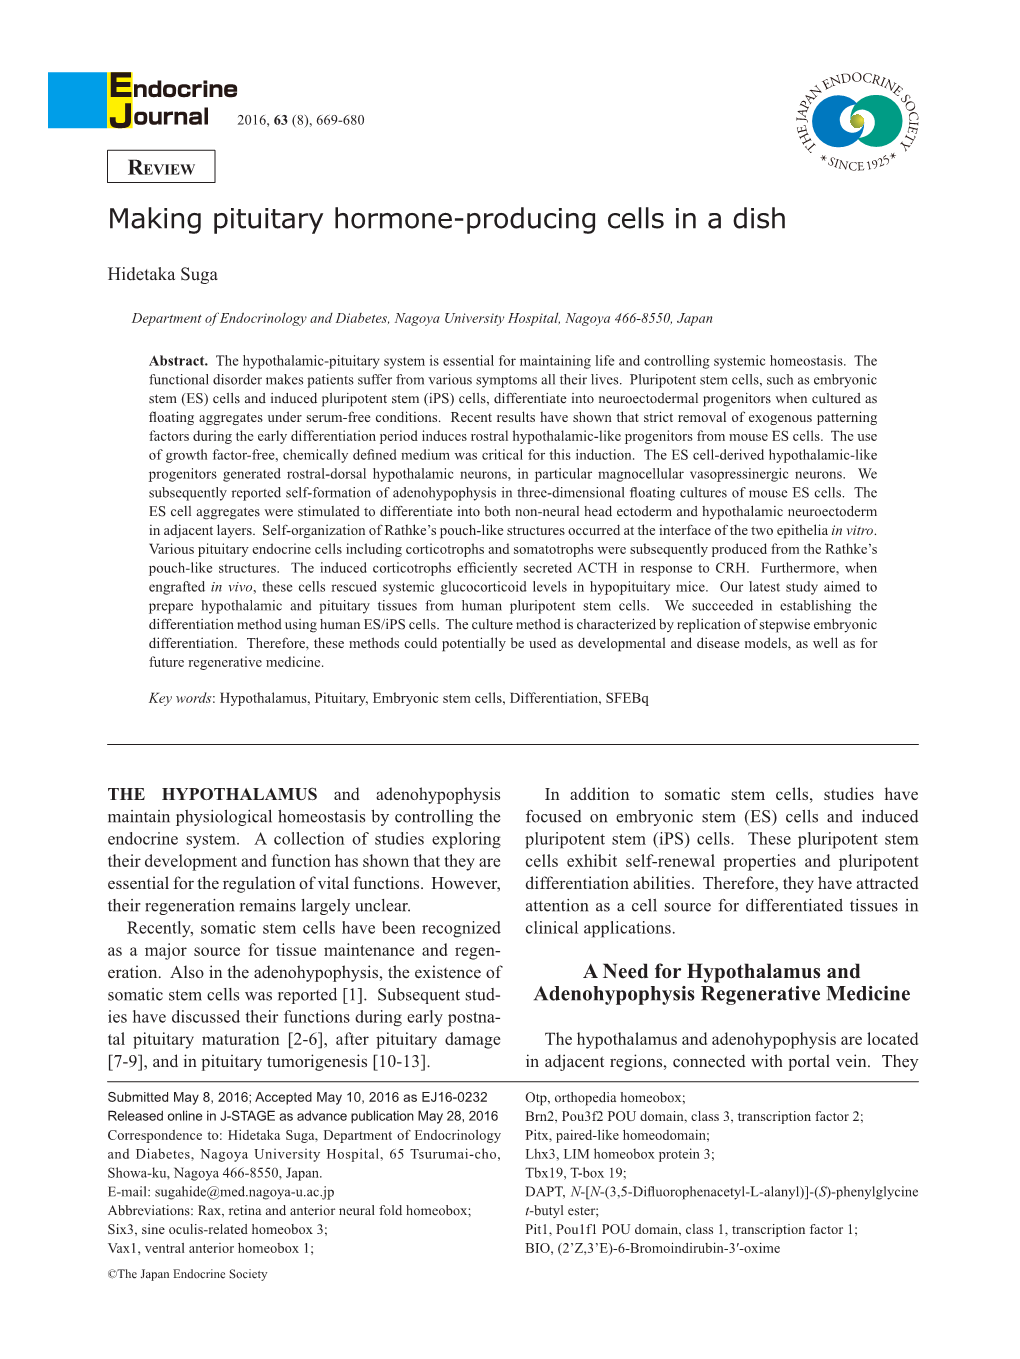 Making Pituitary Hormone-Producing Cells in a Dish